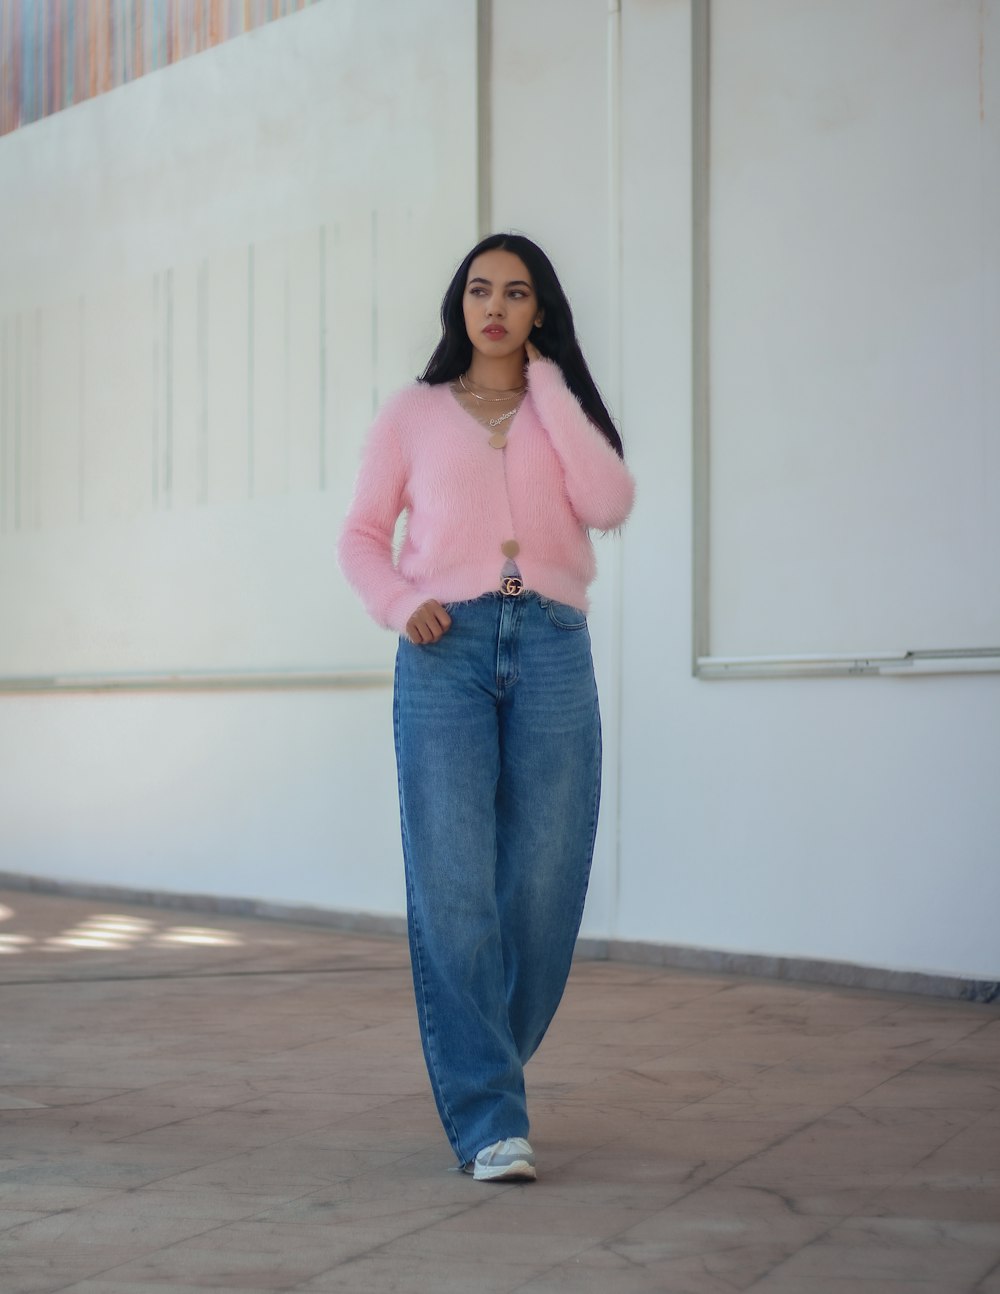 woman in pink long sleeve shirt and blue denim jeans standing near white wall